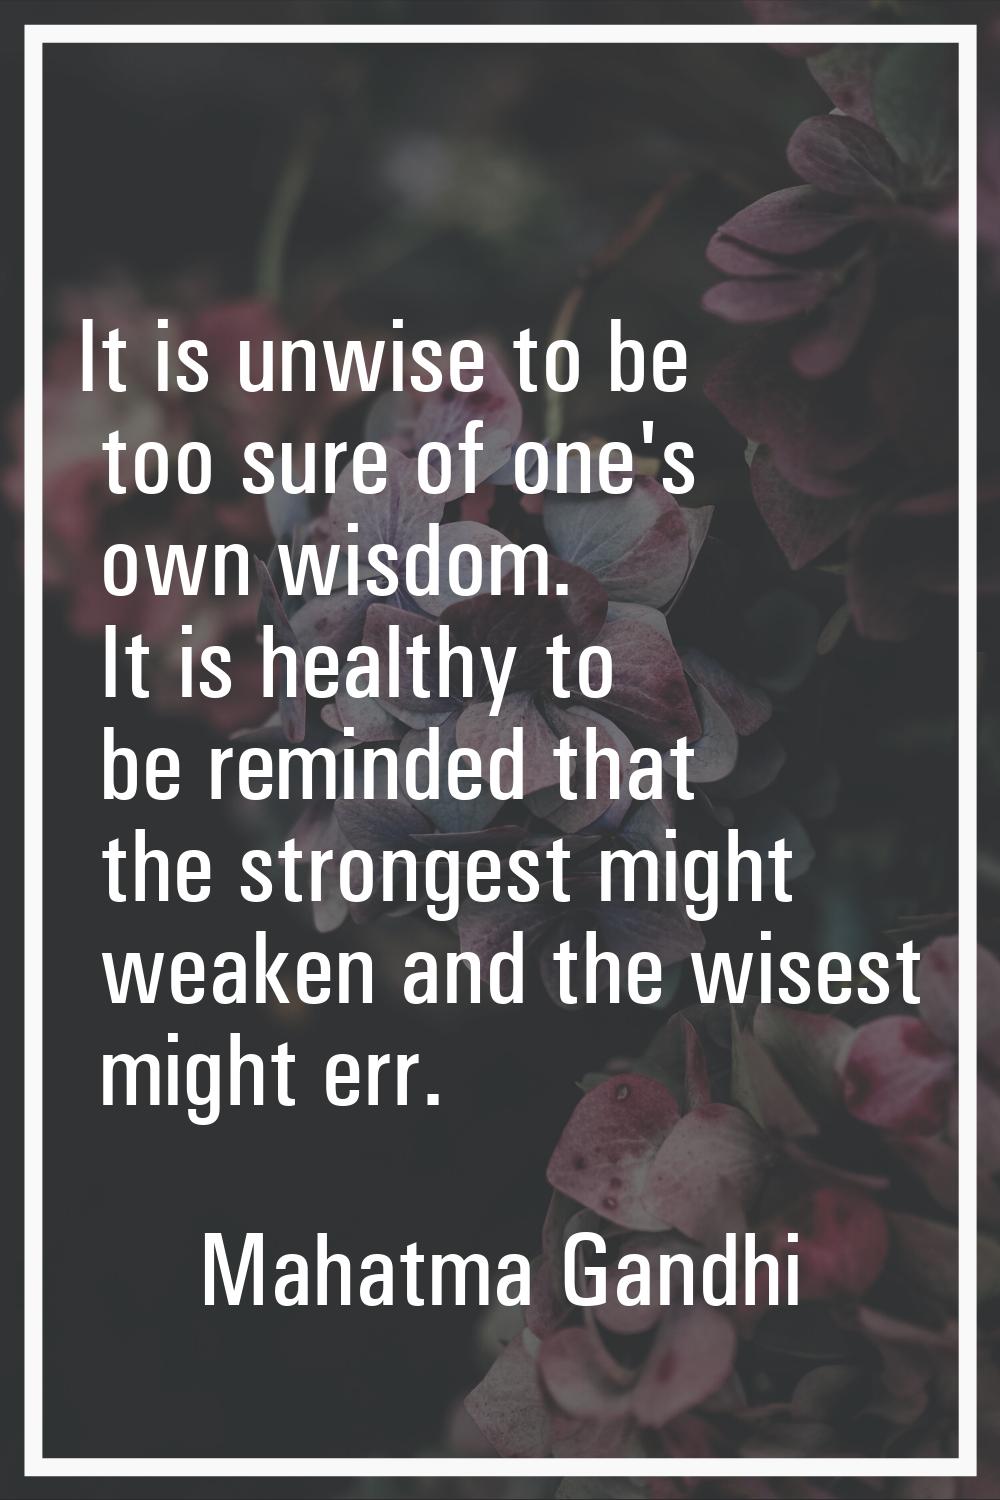 It is unwise to be too sure of one's own wisdom. It is healthy to be reminded that the strongest mi